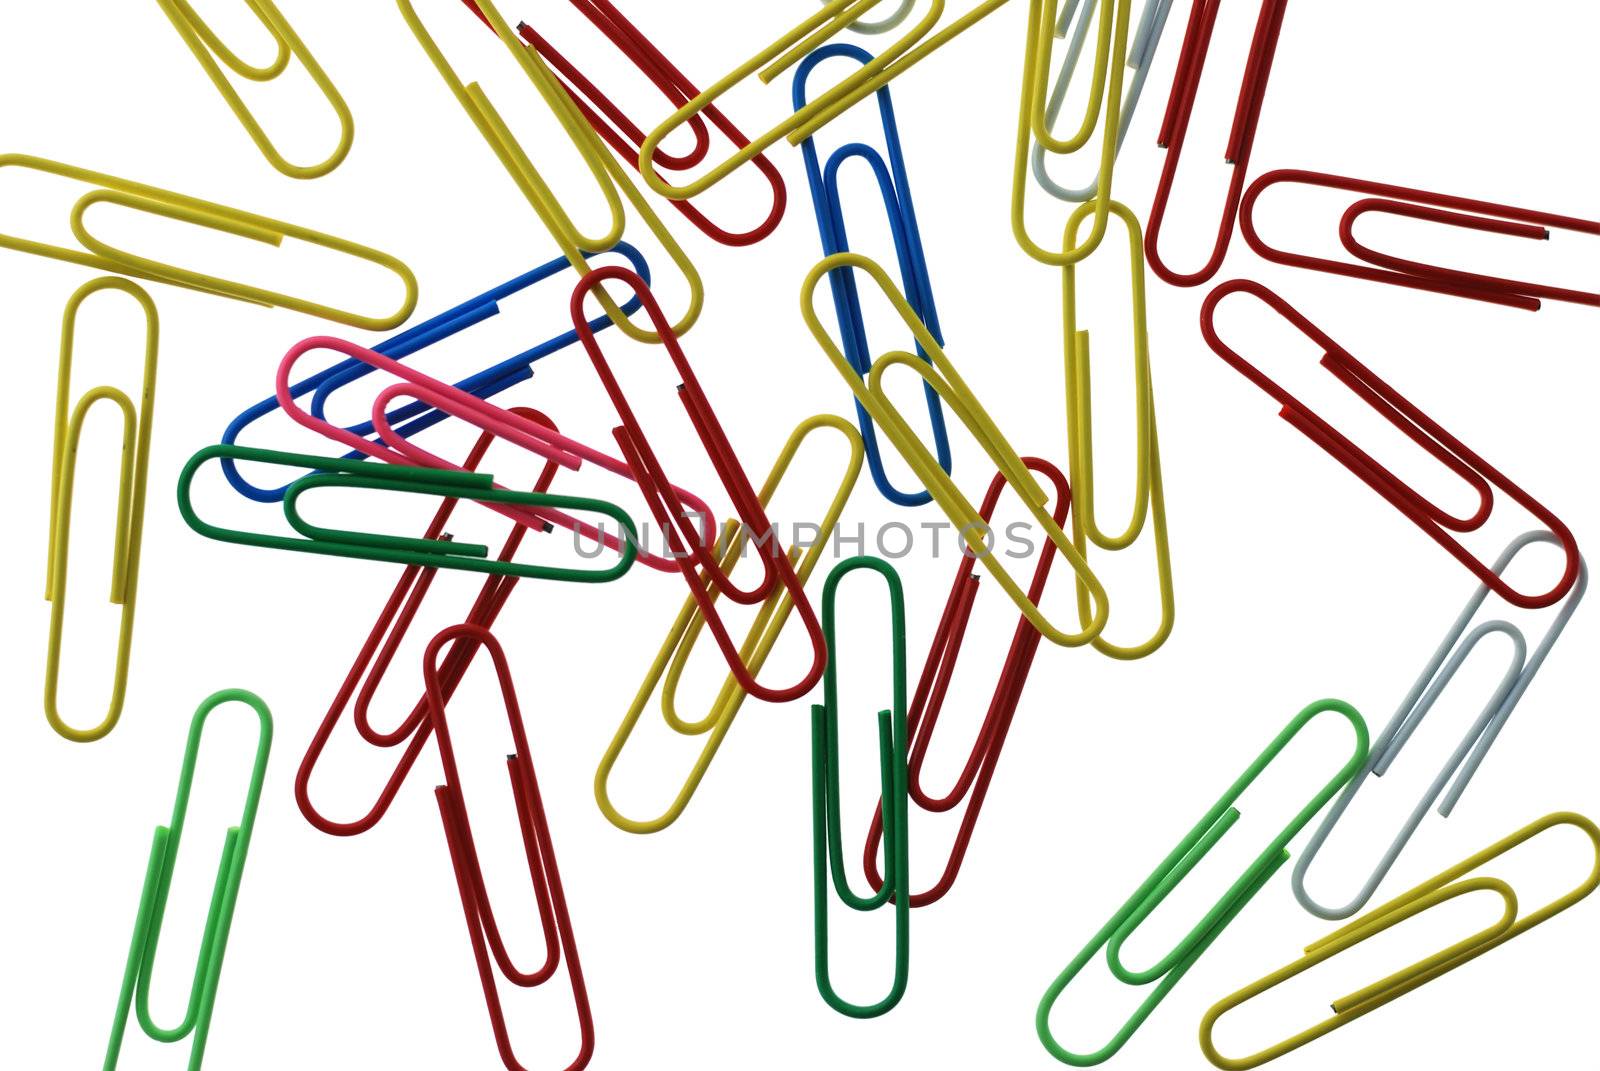 background from abstract office paper clips by galdzer